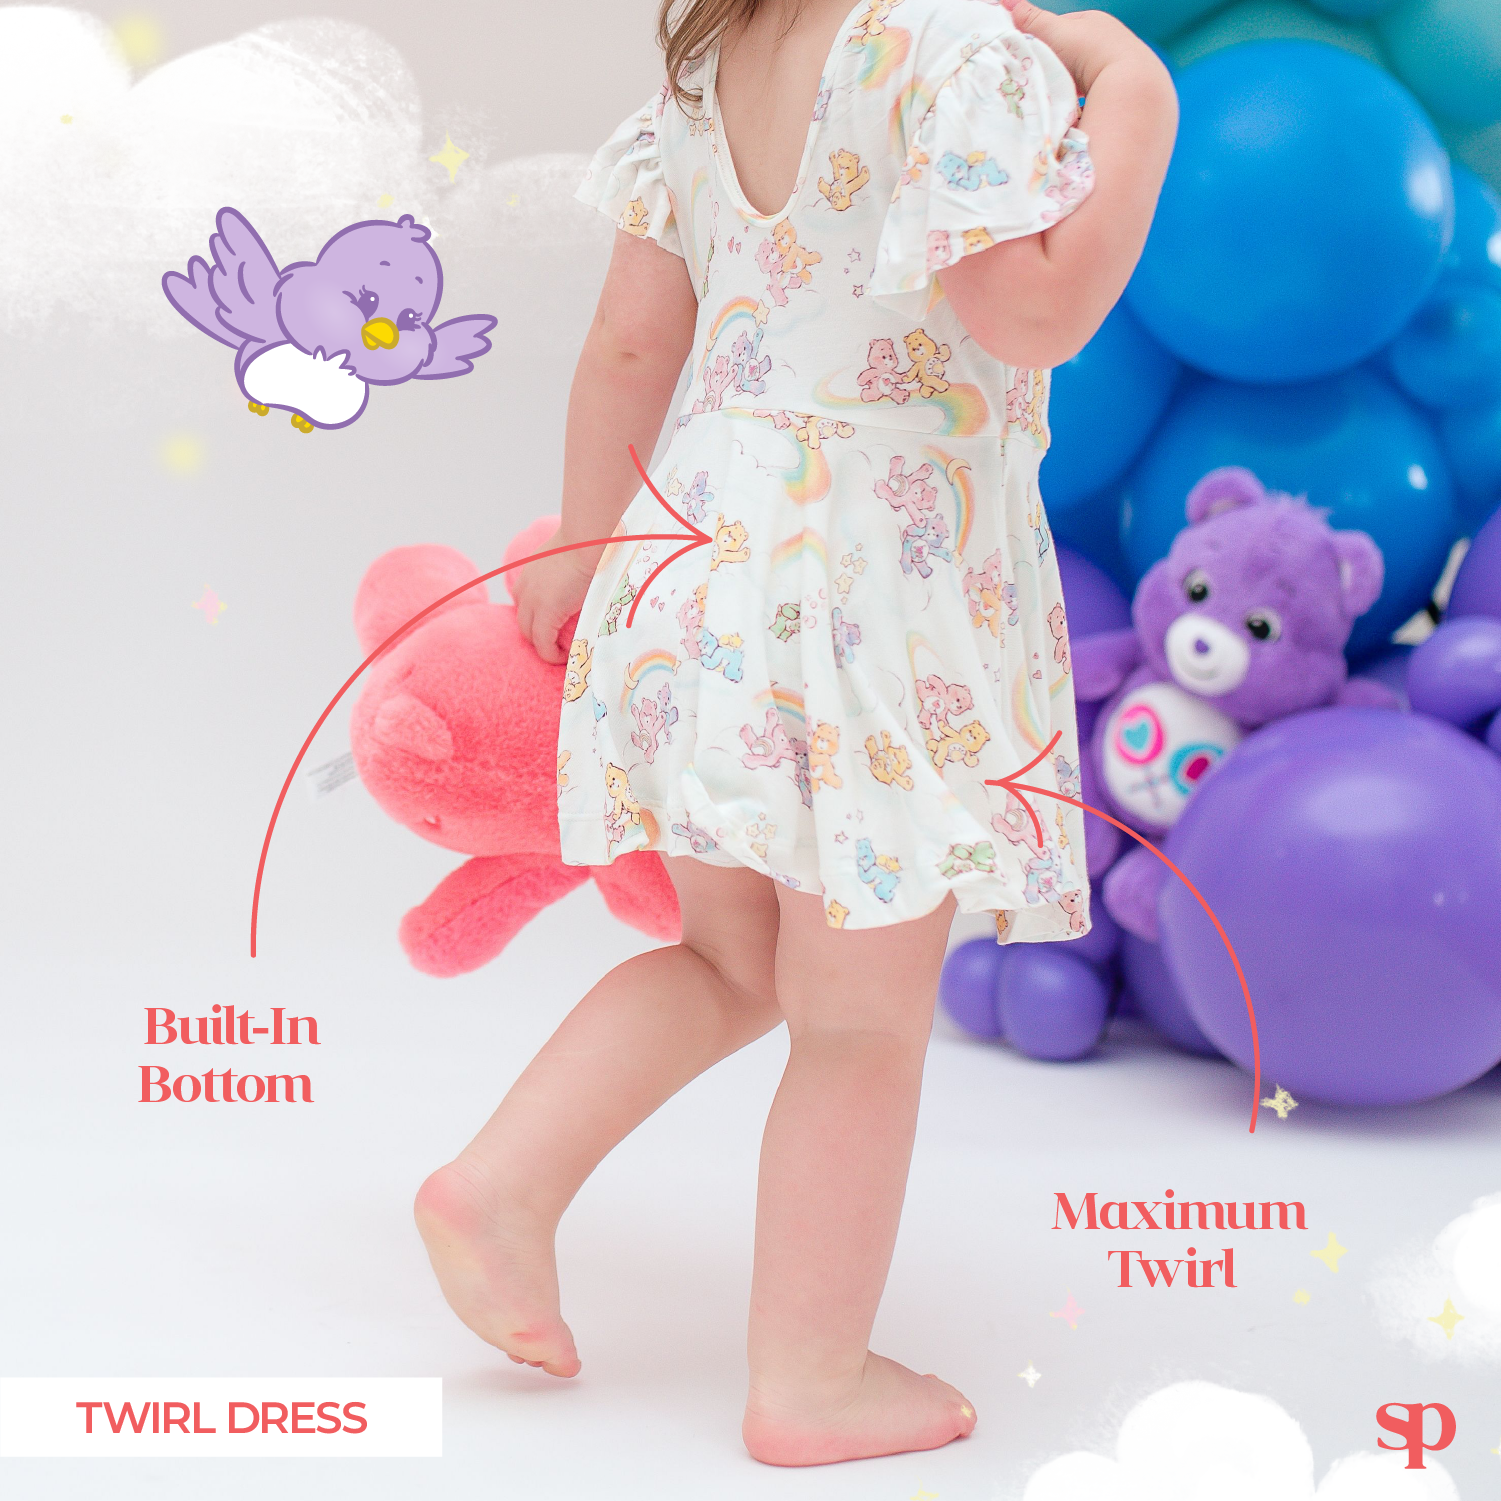 Care Bears Share Bear Cloud Cotton Sibling Twirl Dress and Romper